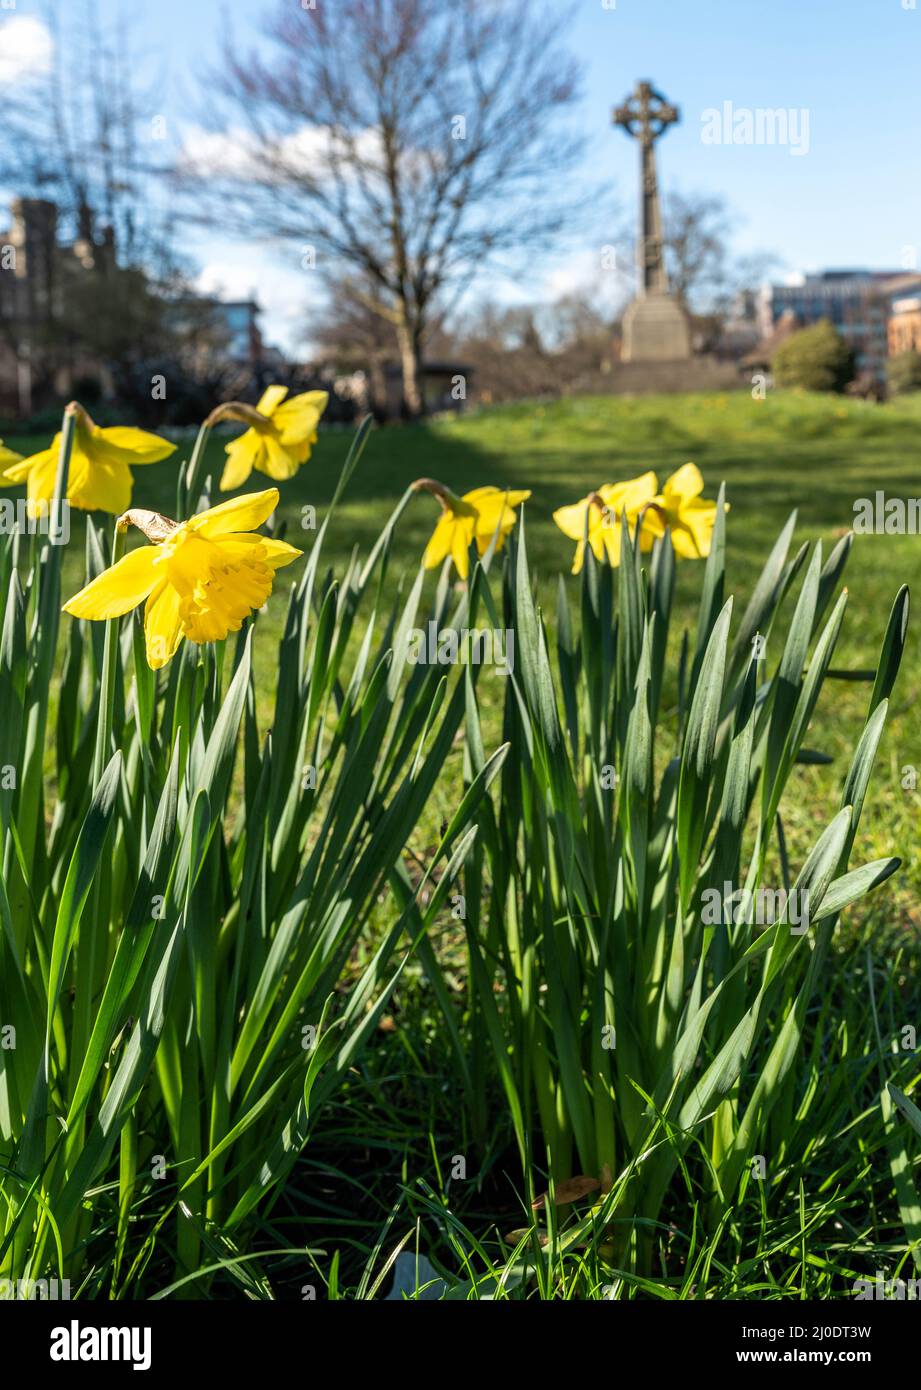 Daffodils in Forbury Gardens with Cross Stock Photo